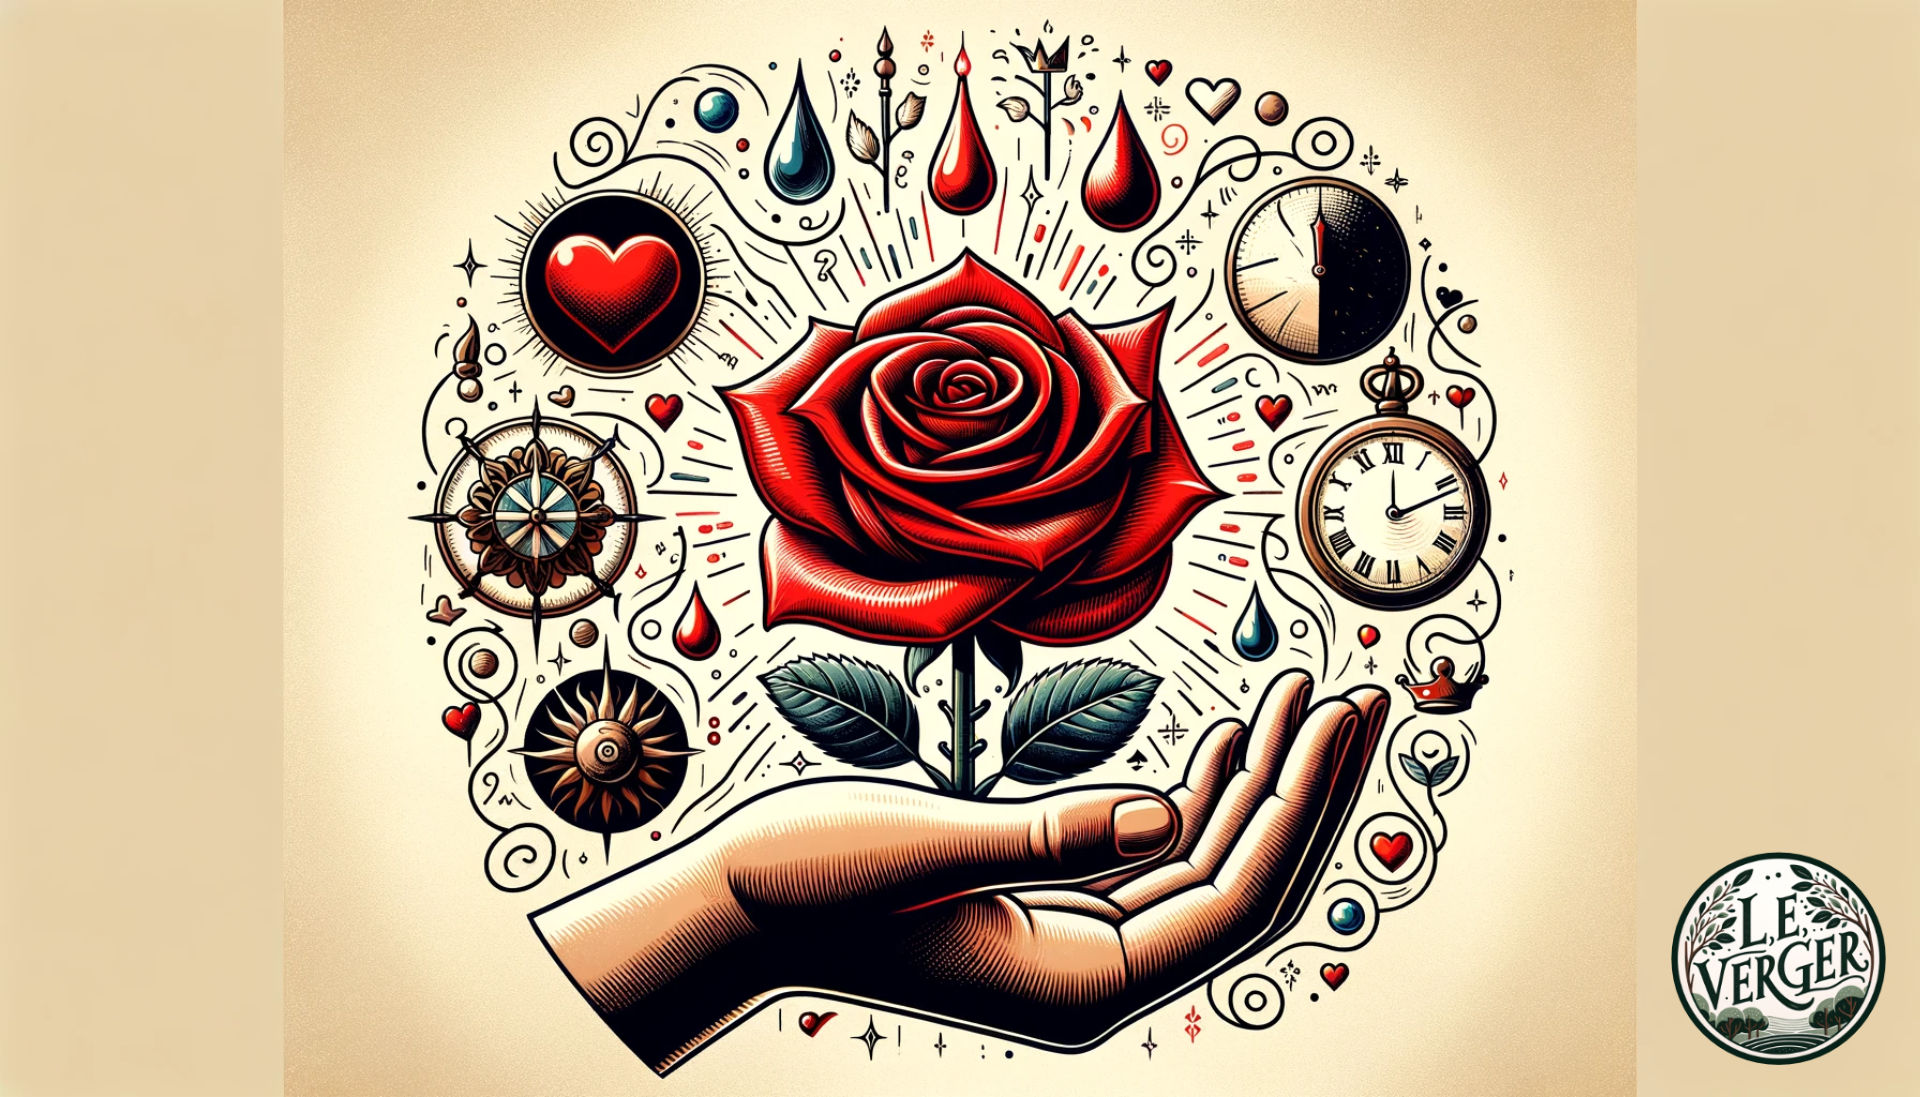 Illustration of a hand holding a radiant red rose, with symbols and icons swirling around it. An intertwined heart represents love, a droplet signifies sorrow, a clock for fleeting time, and a crown for royalty. Each symbol elucidates a different meaning associated with the rose.